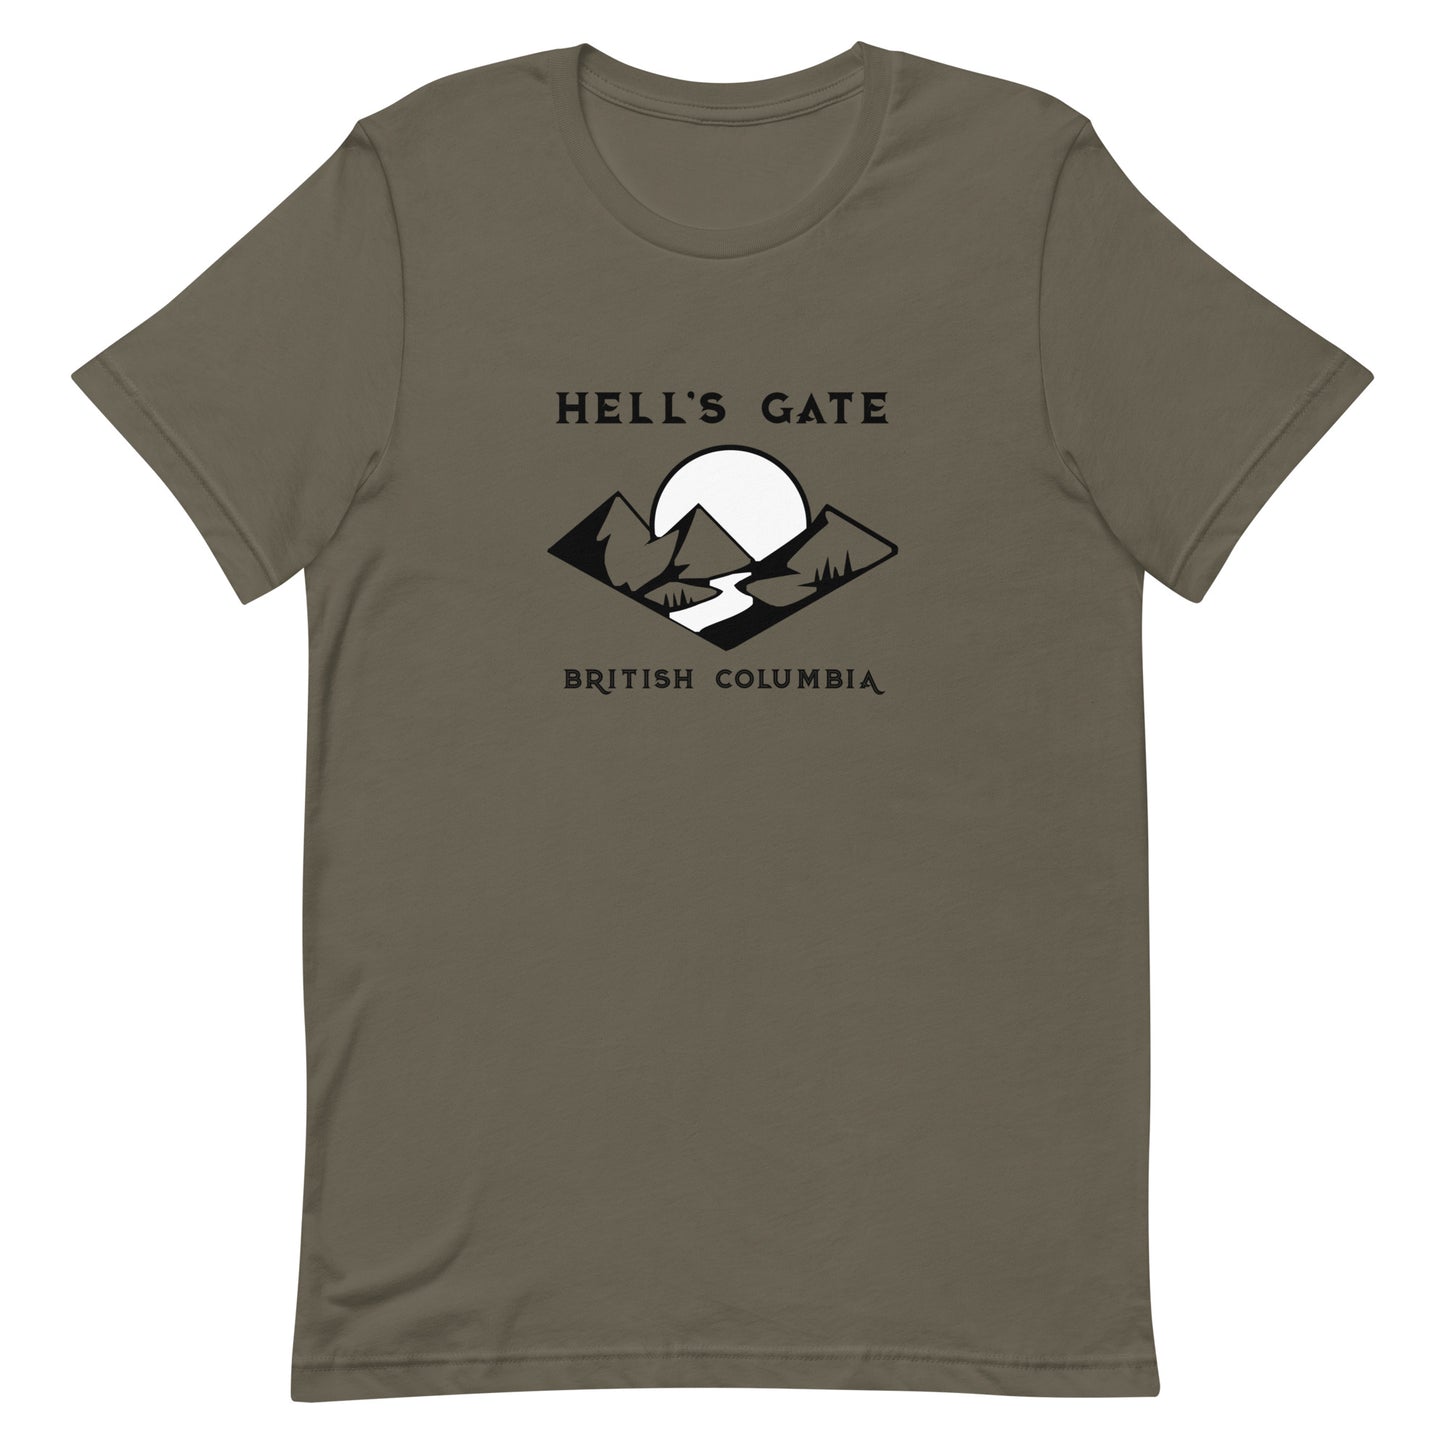 "Hell's Gate" Unisex T-shirt (The Guild Codex)